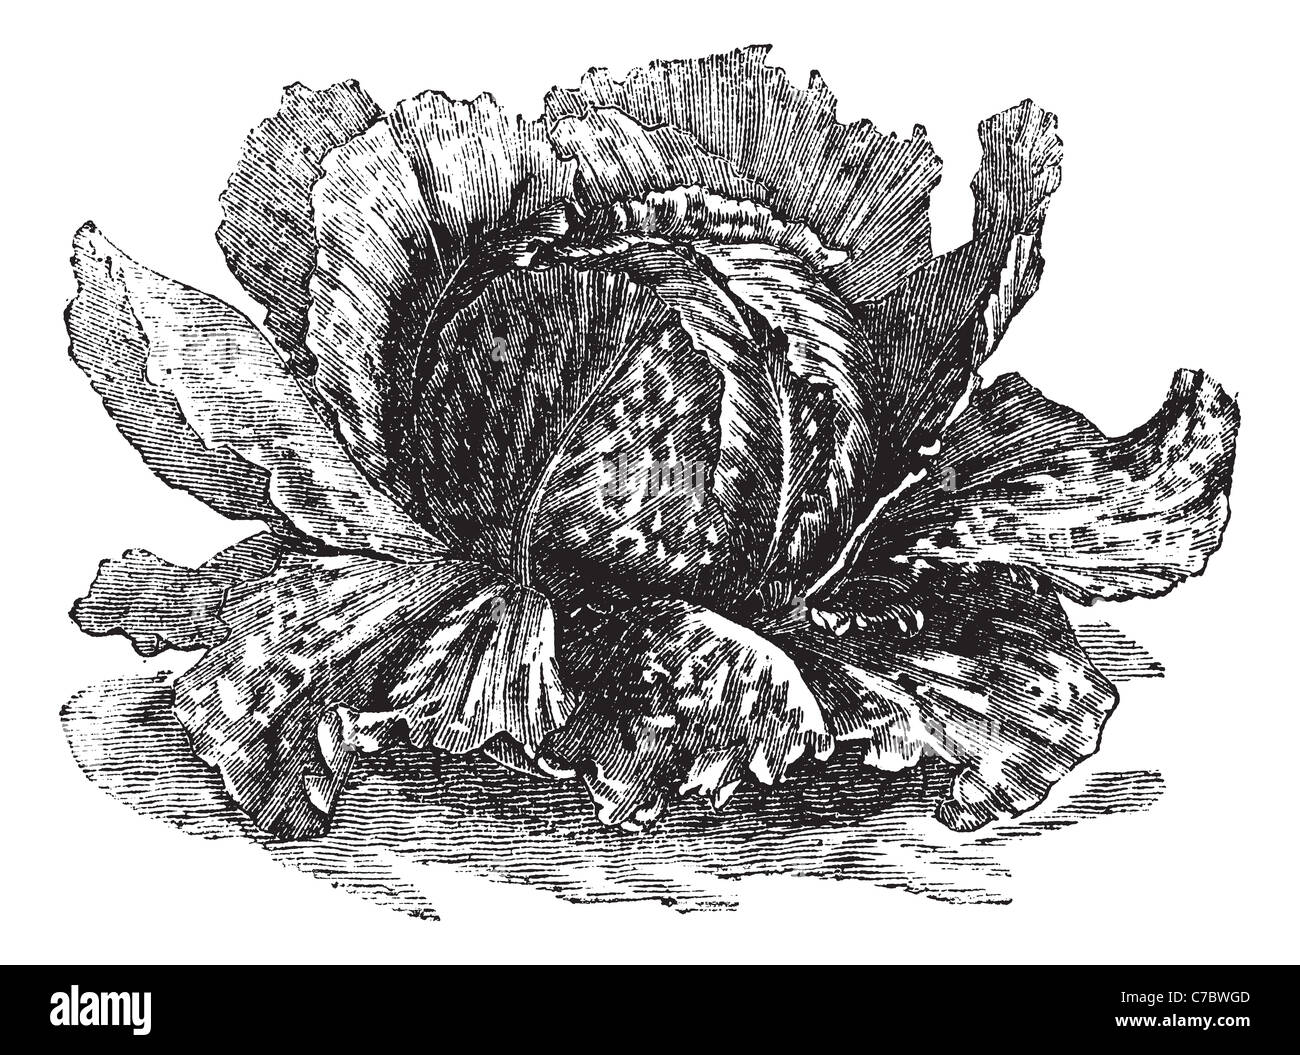 Lettuce (Lactuca sativa) vintage engraving. Old engraved illustration of lettuce isolated on white. Stock Photo